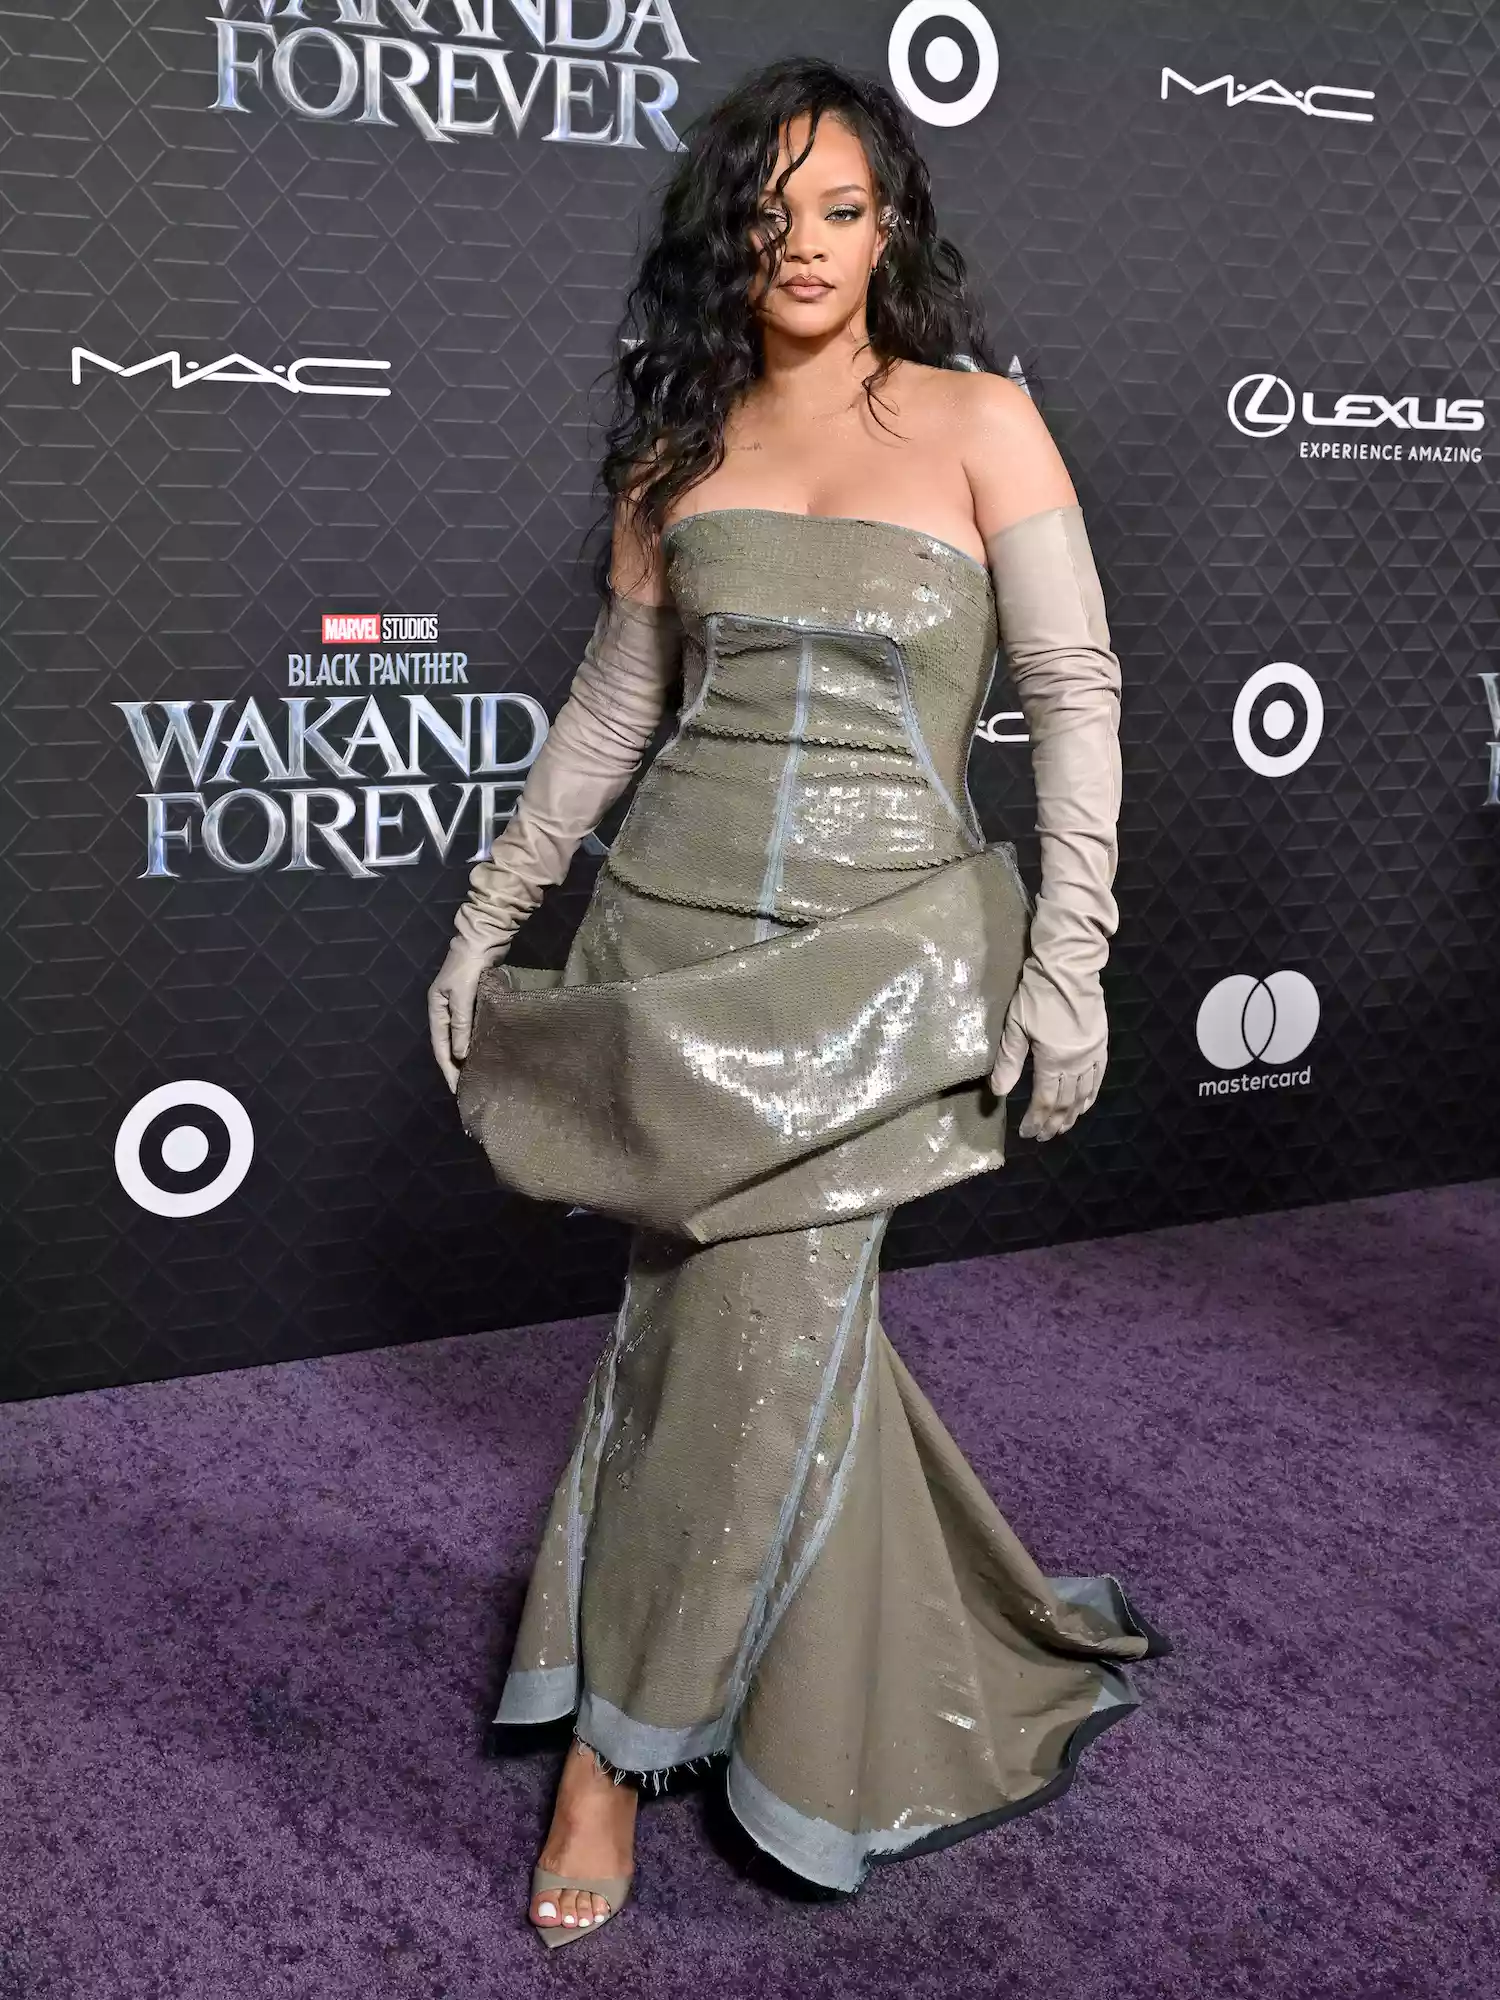 Rihanna wears a sequined Rick Owens gown and beige gloves to the Black Panther: Wakanda Forever premiere